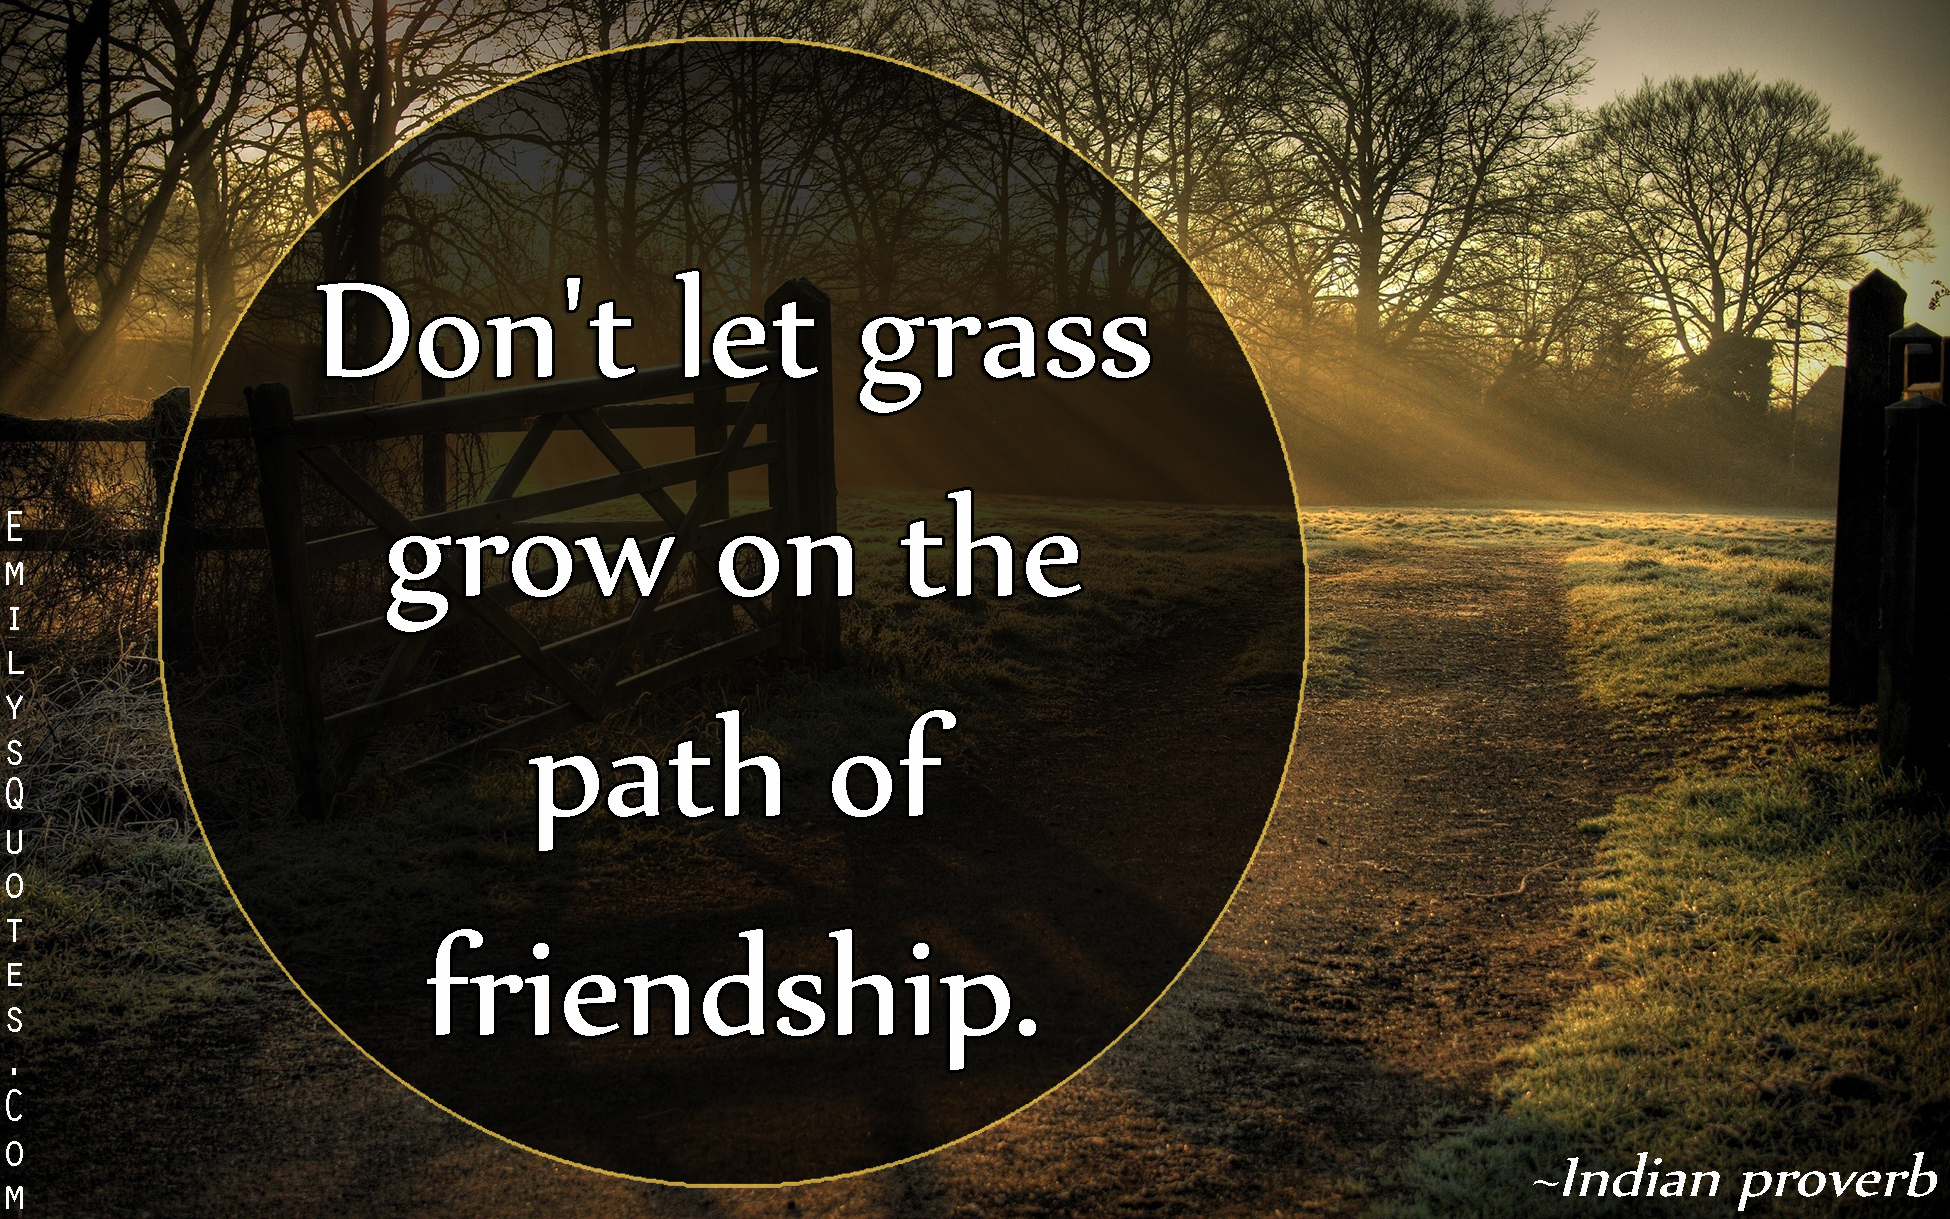 Don’t let grass grow on the path of friendship